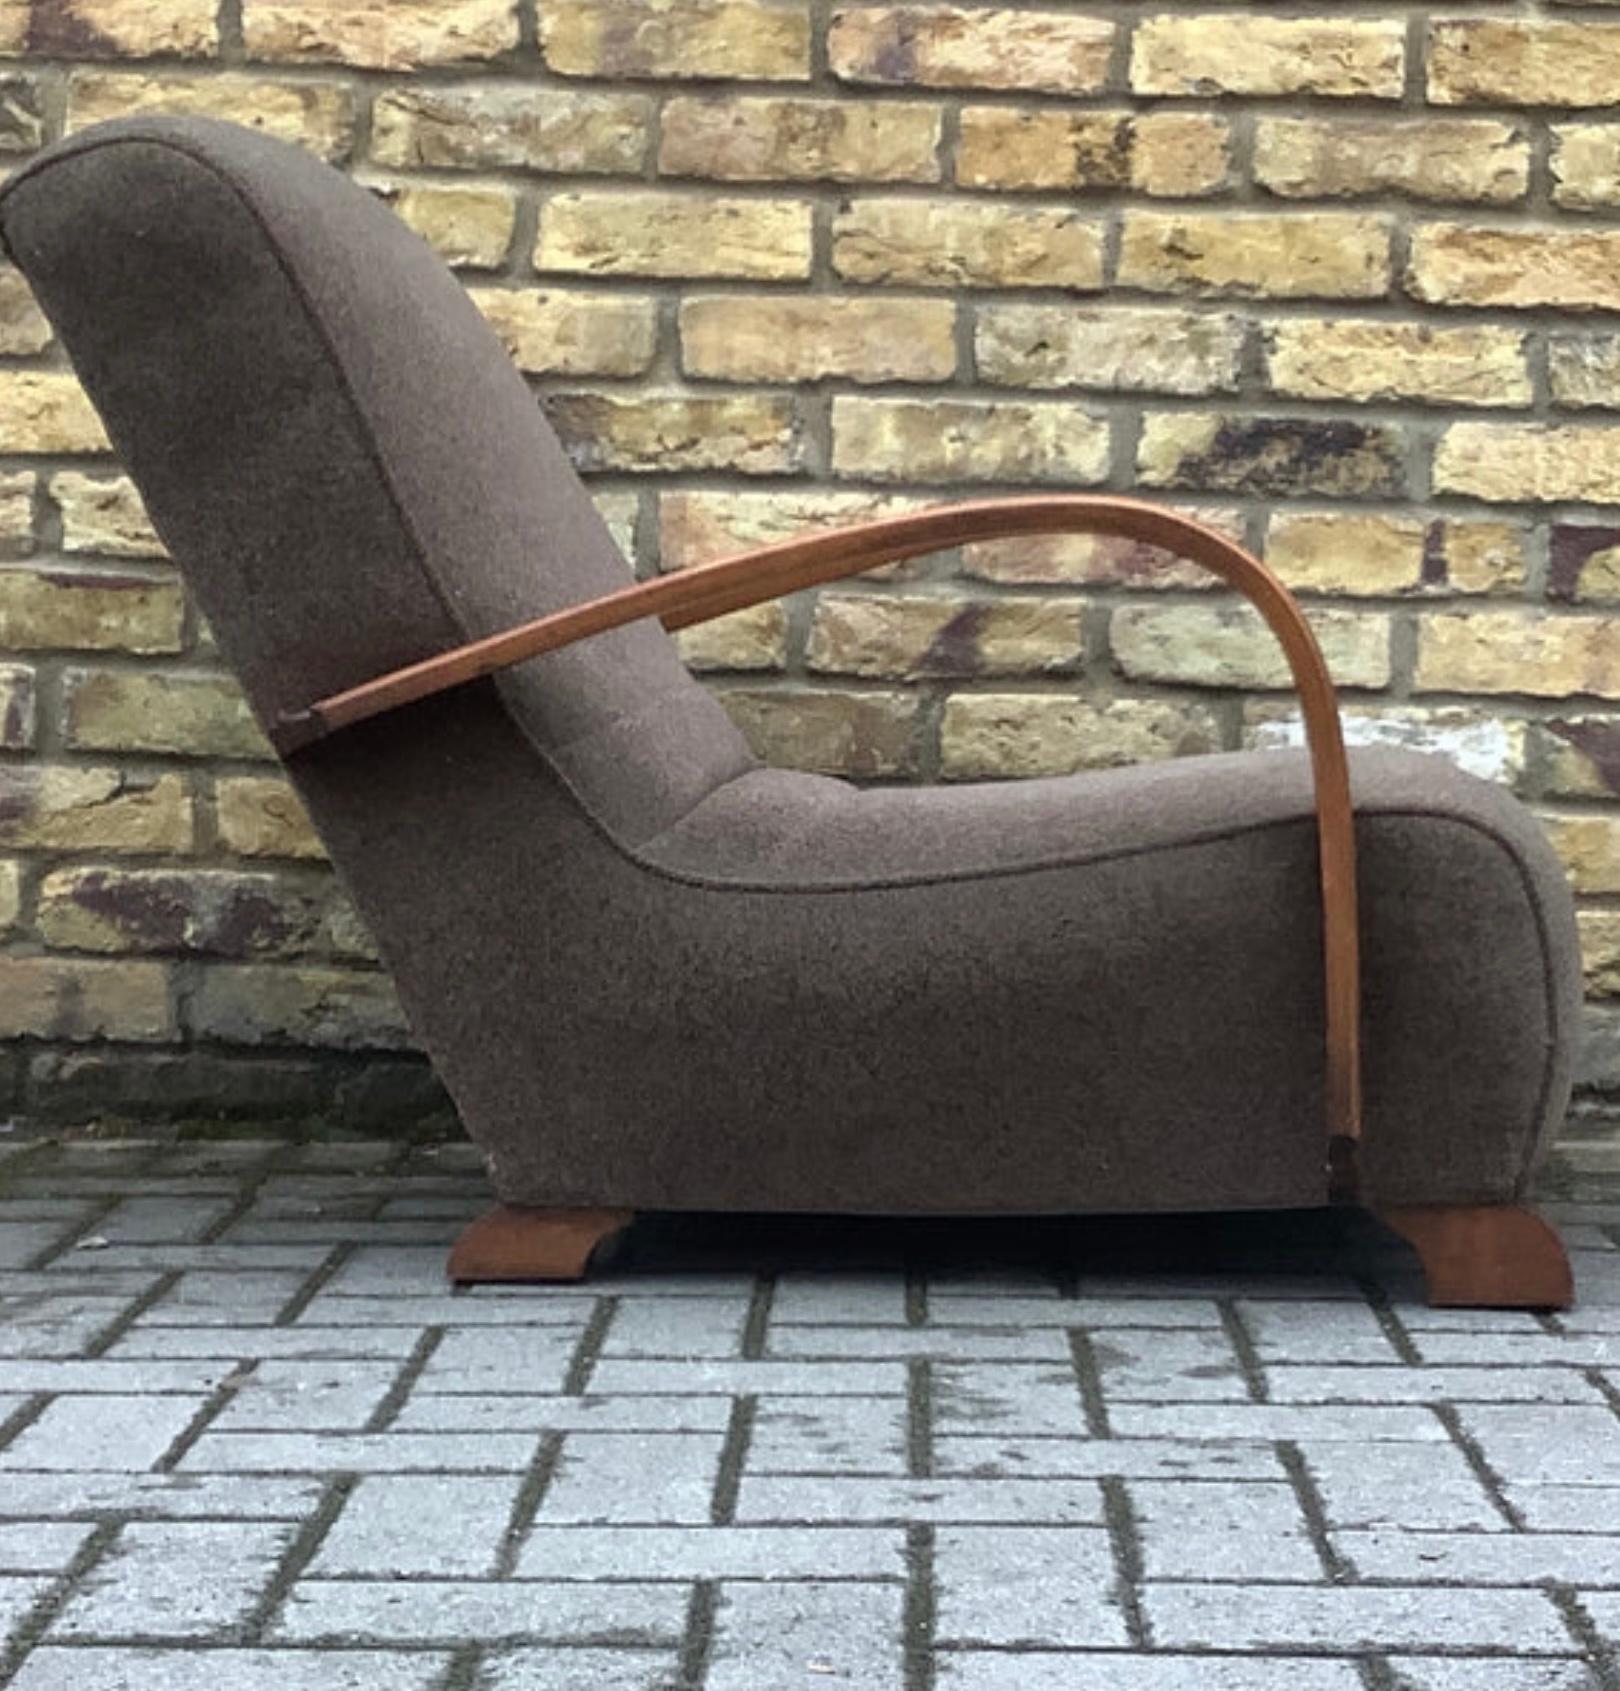 Deco armchair fully reupholstered in soft brown fabric with steamed bent armchair in the style of the Czech Republic designer Jindrich Halabala
Super low and comfortable.